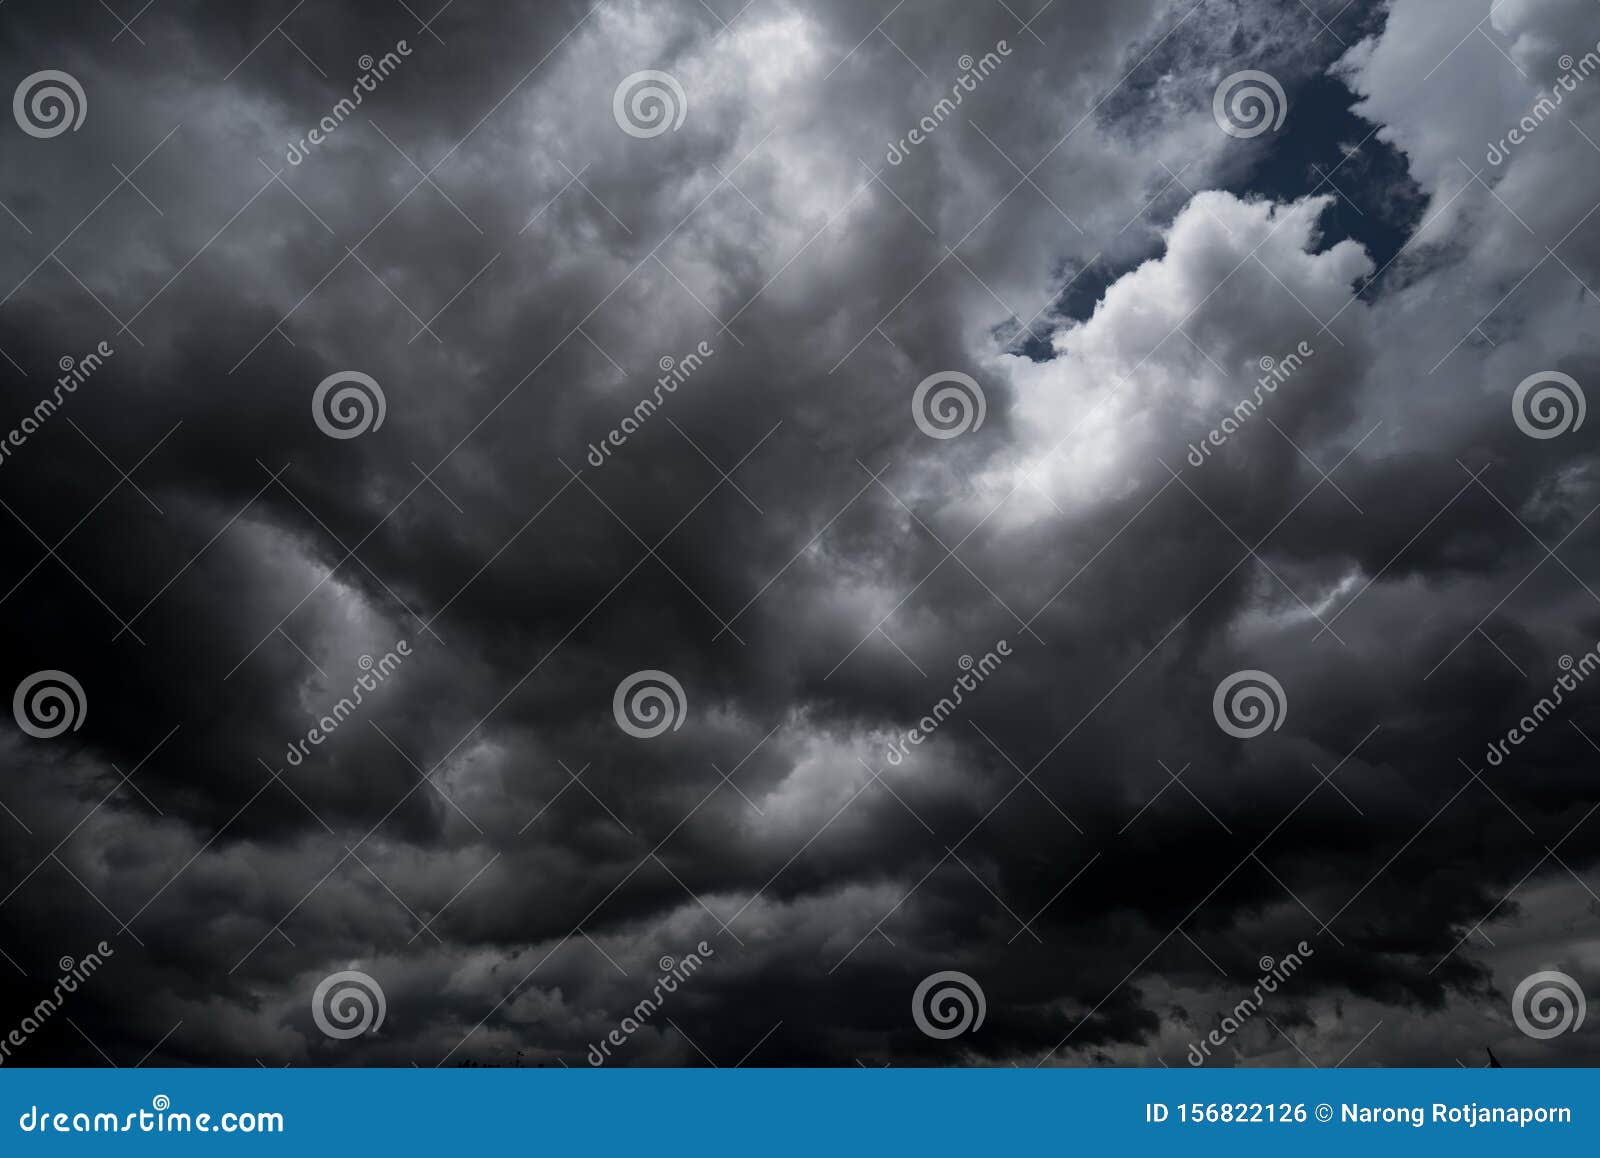 Dark Storm Clouds With Background Dark Clouds Before A Thunder Storm Stock Photo Image Of Gray Ground